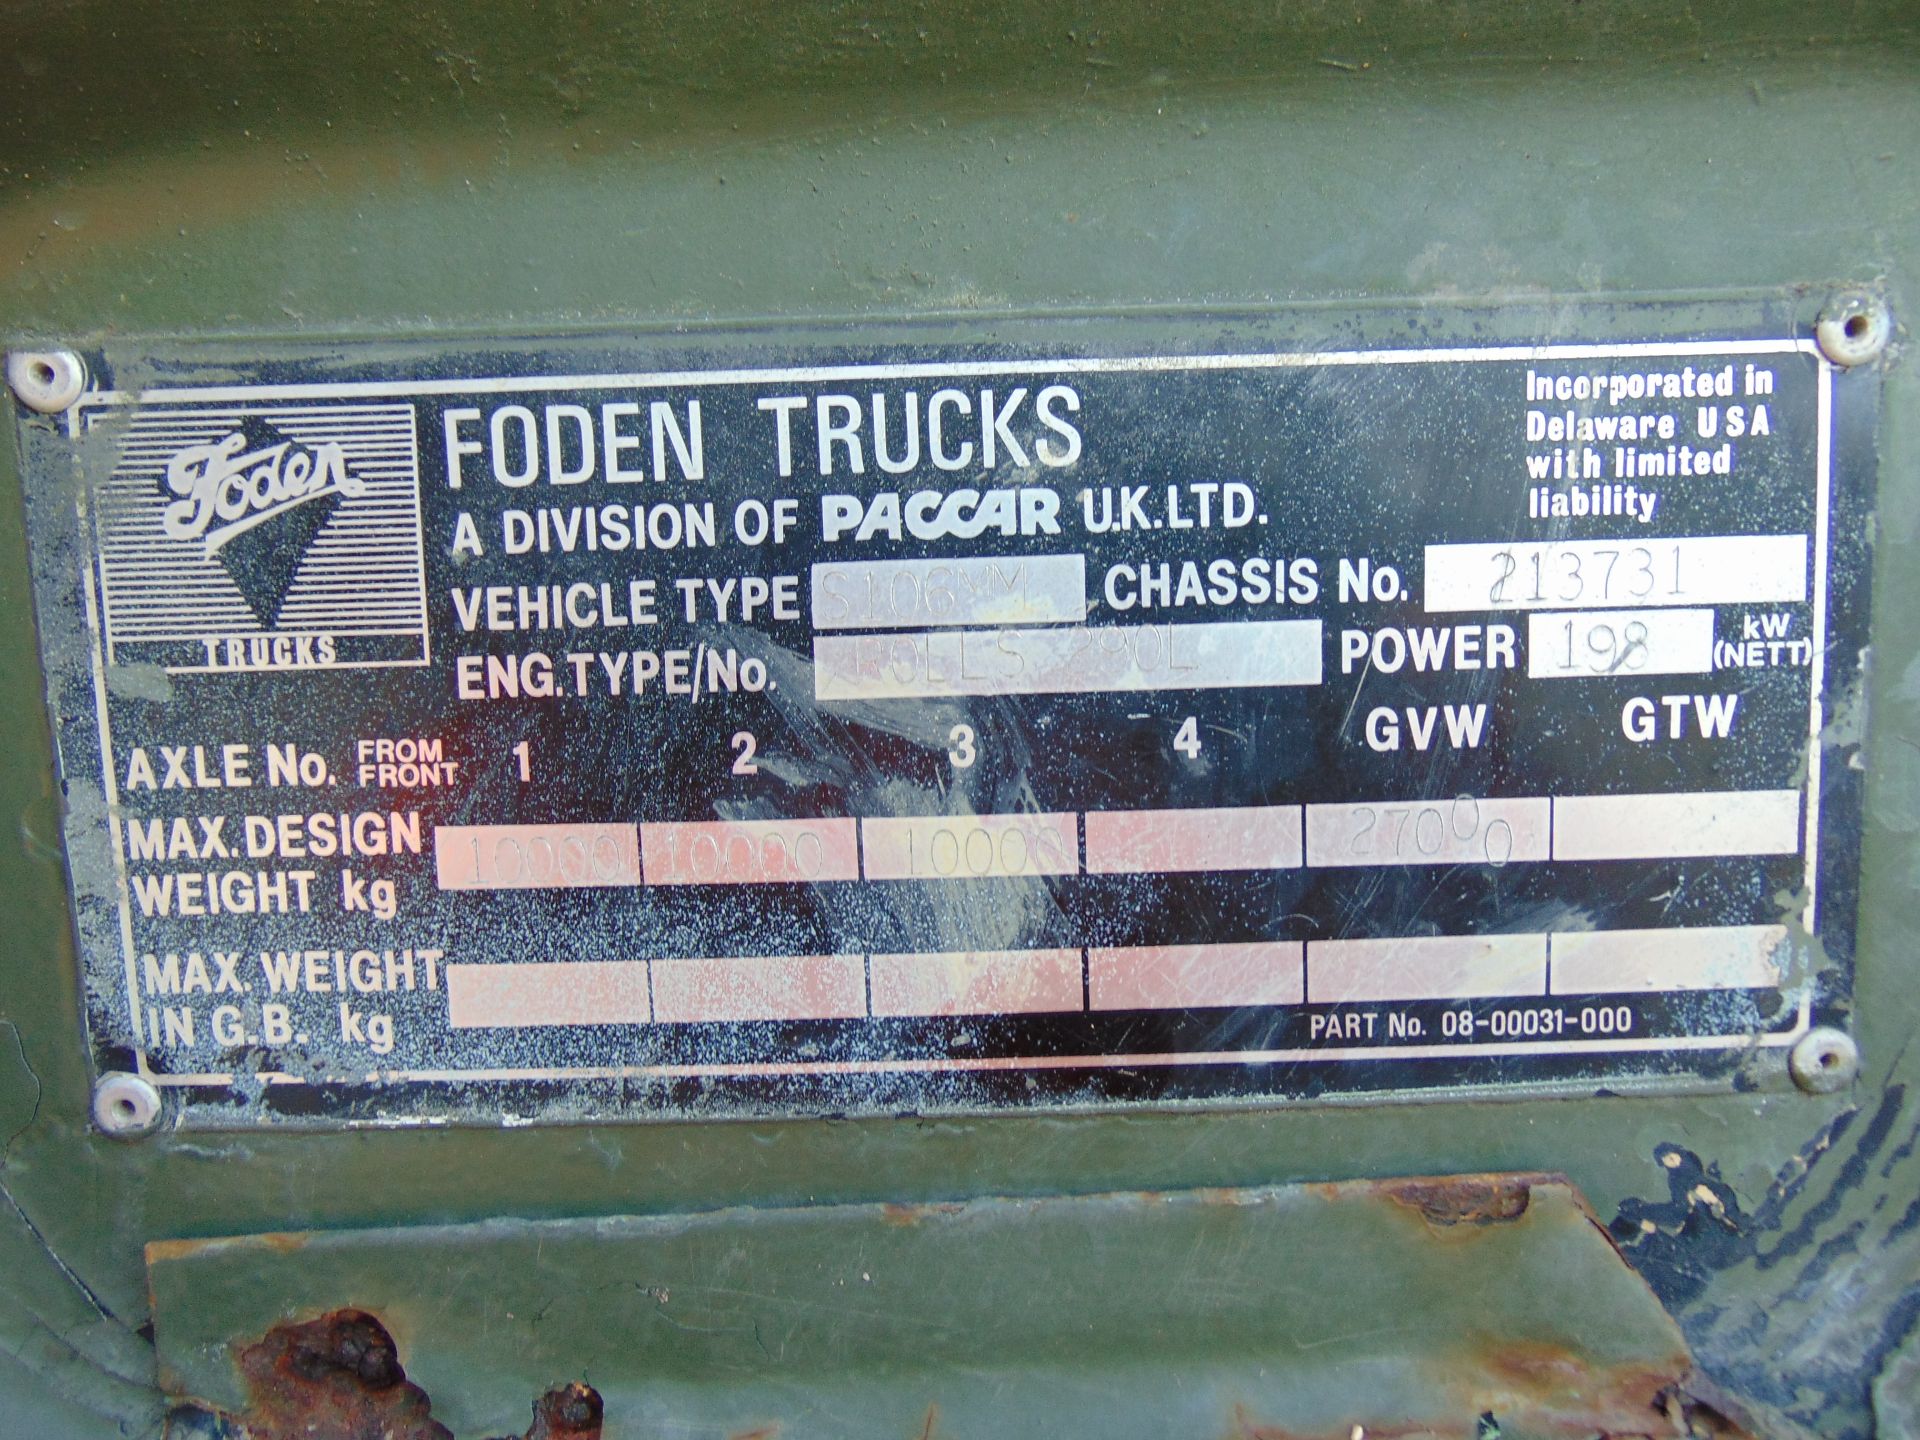 Foden 6x6 Recovery Vehicle which is Complete with Remotes and EKA Recovery Tools - Image 29 of 31